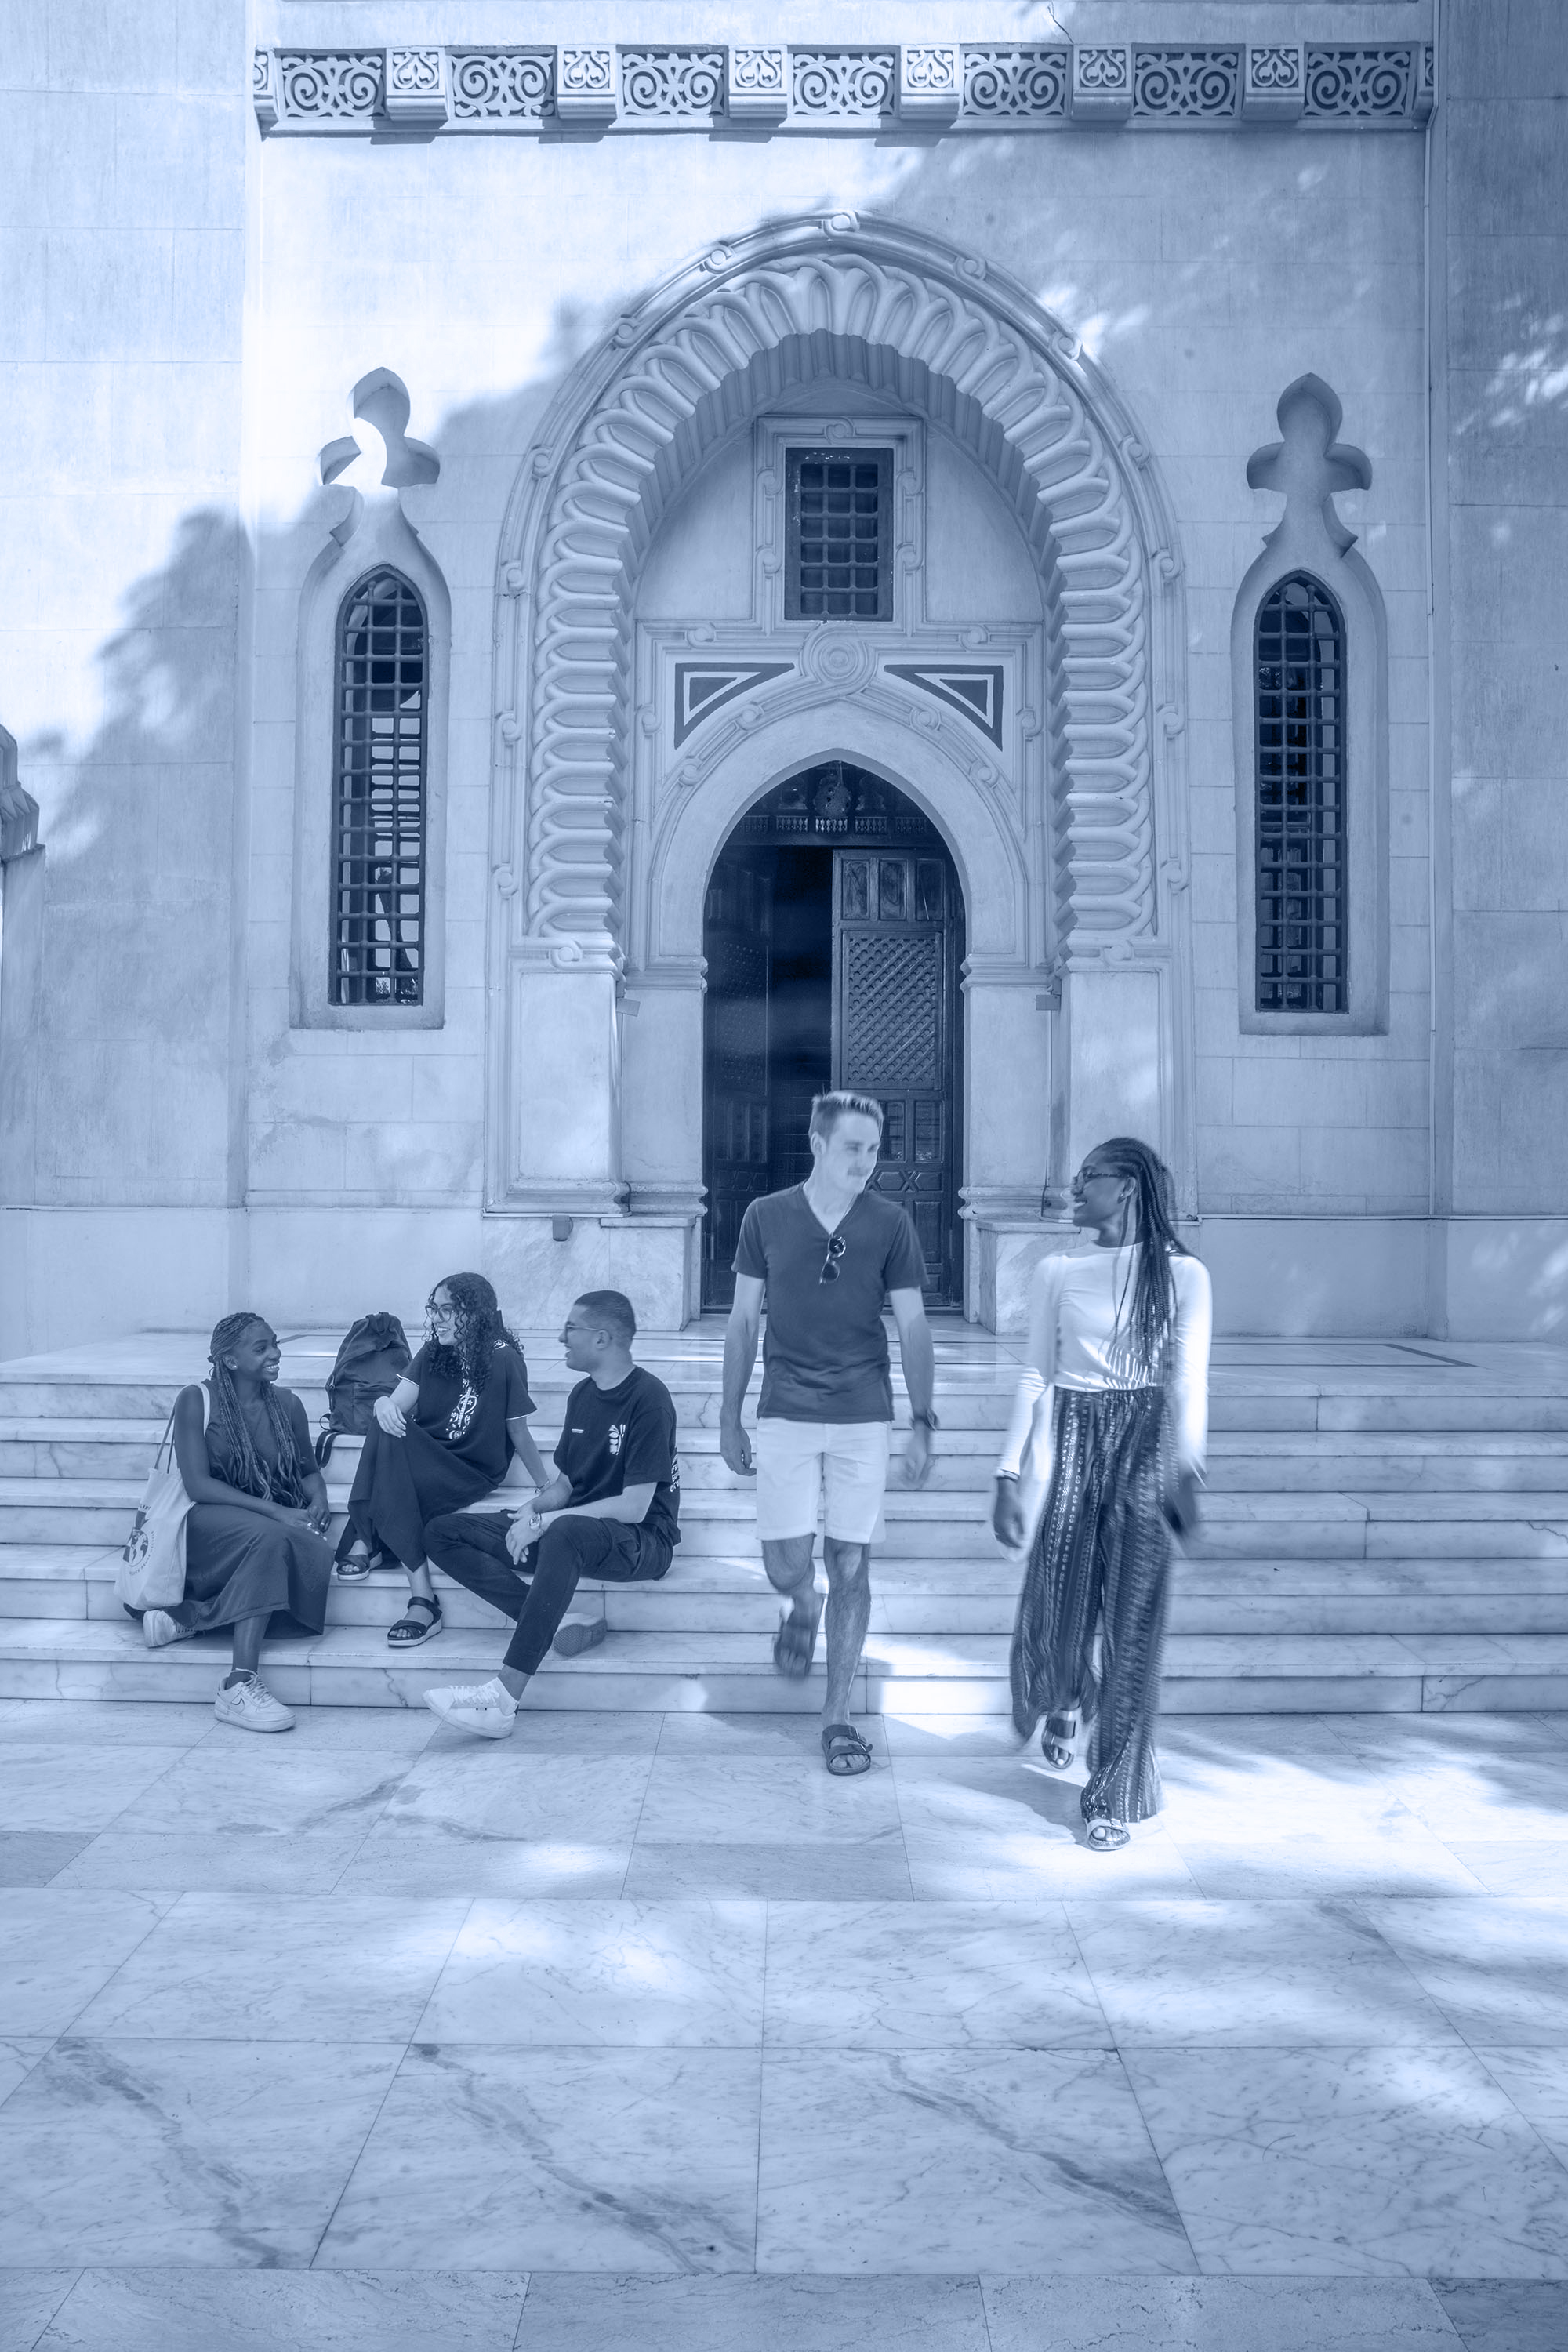 International and comparative education diploma monotone image of international students in old cairo